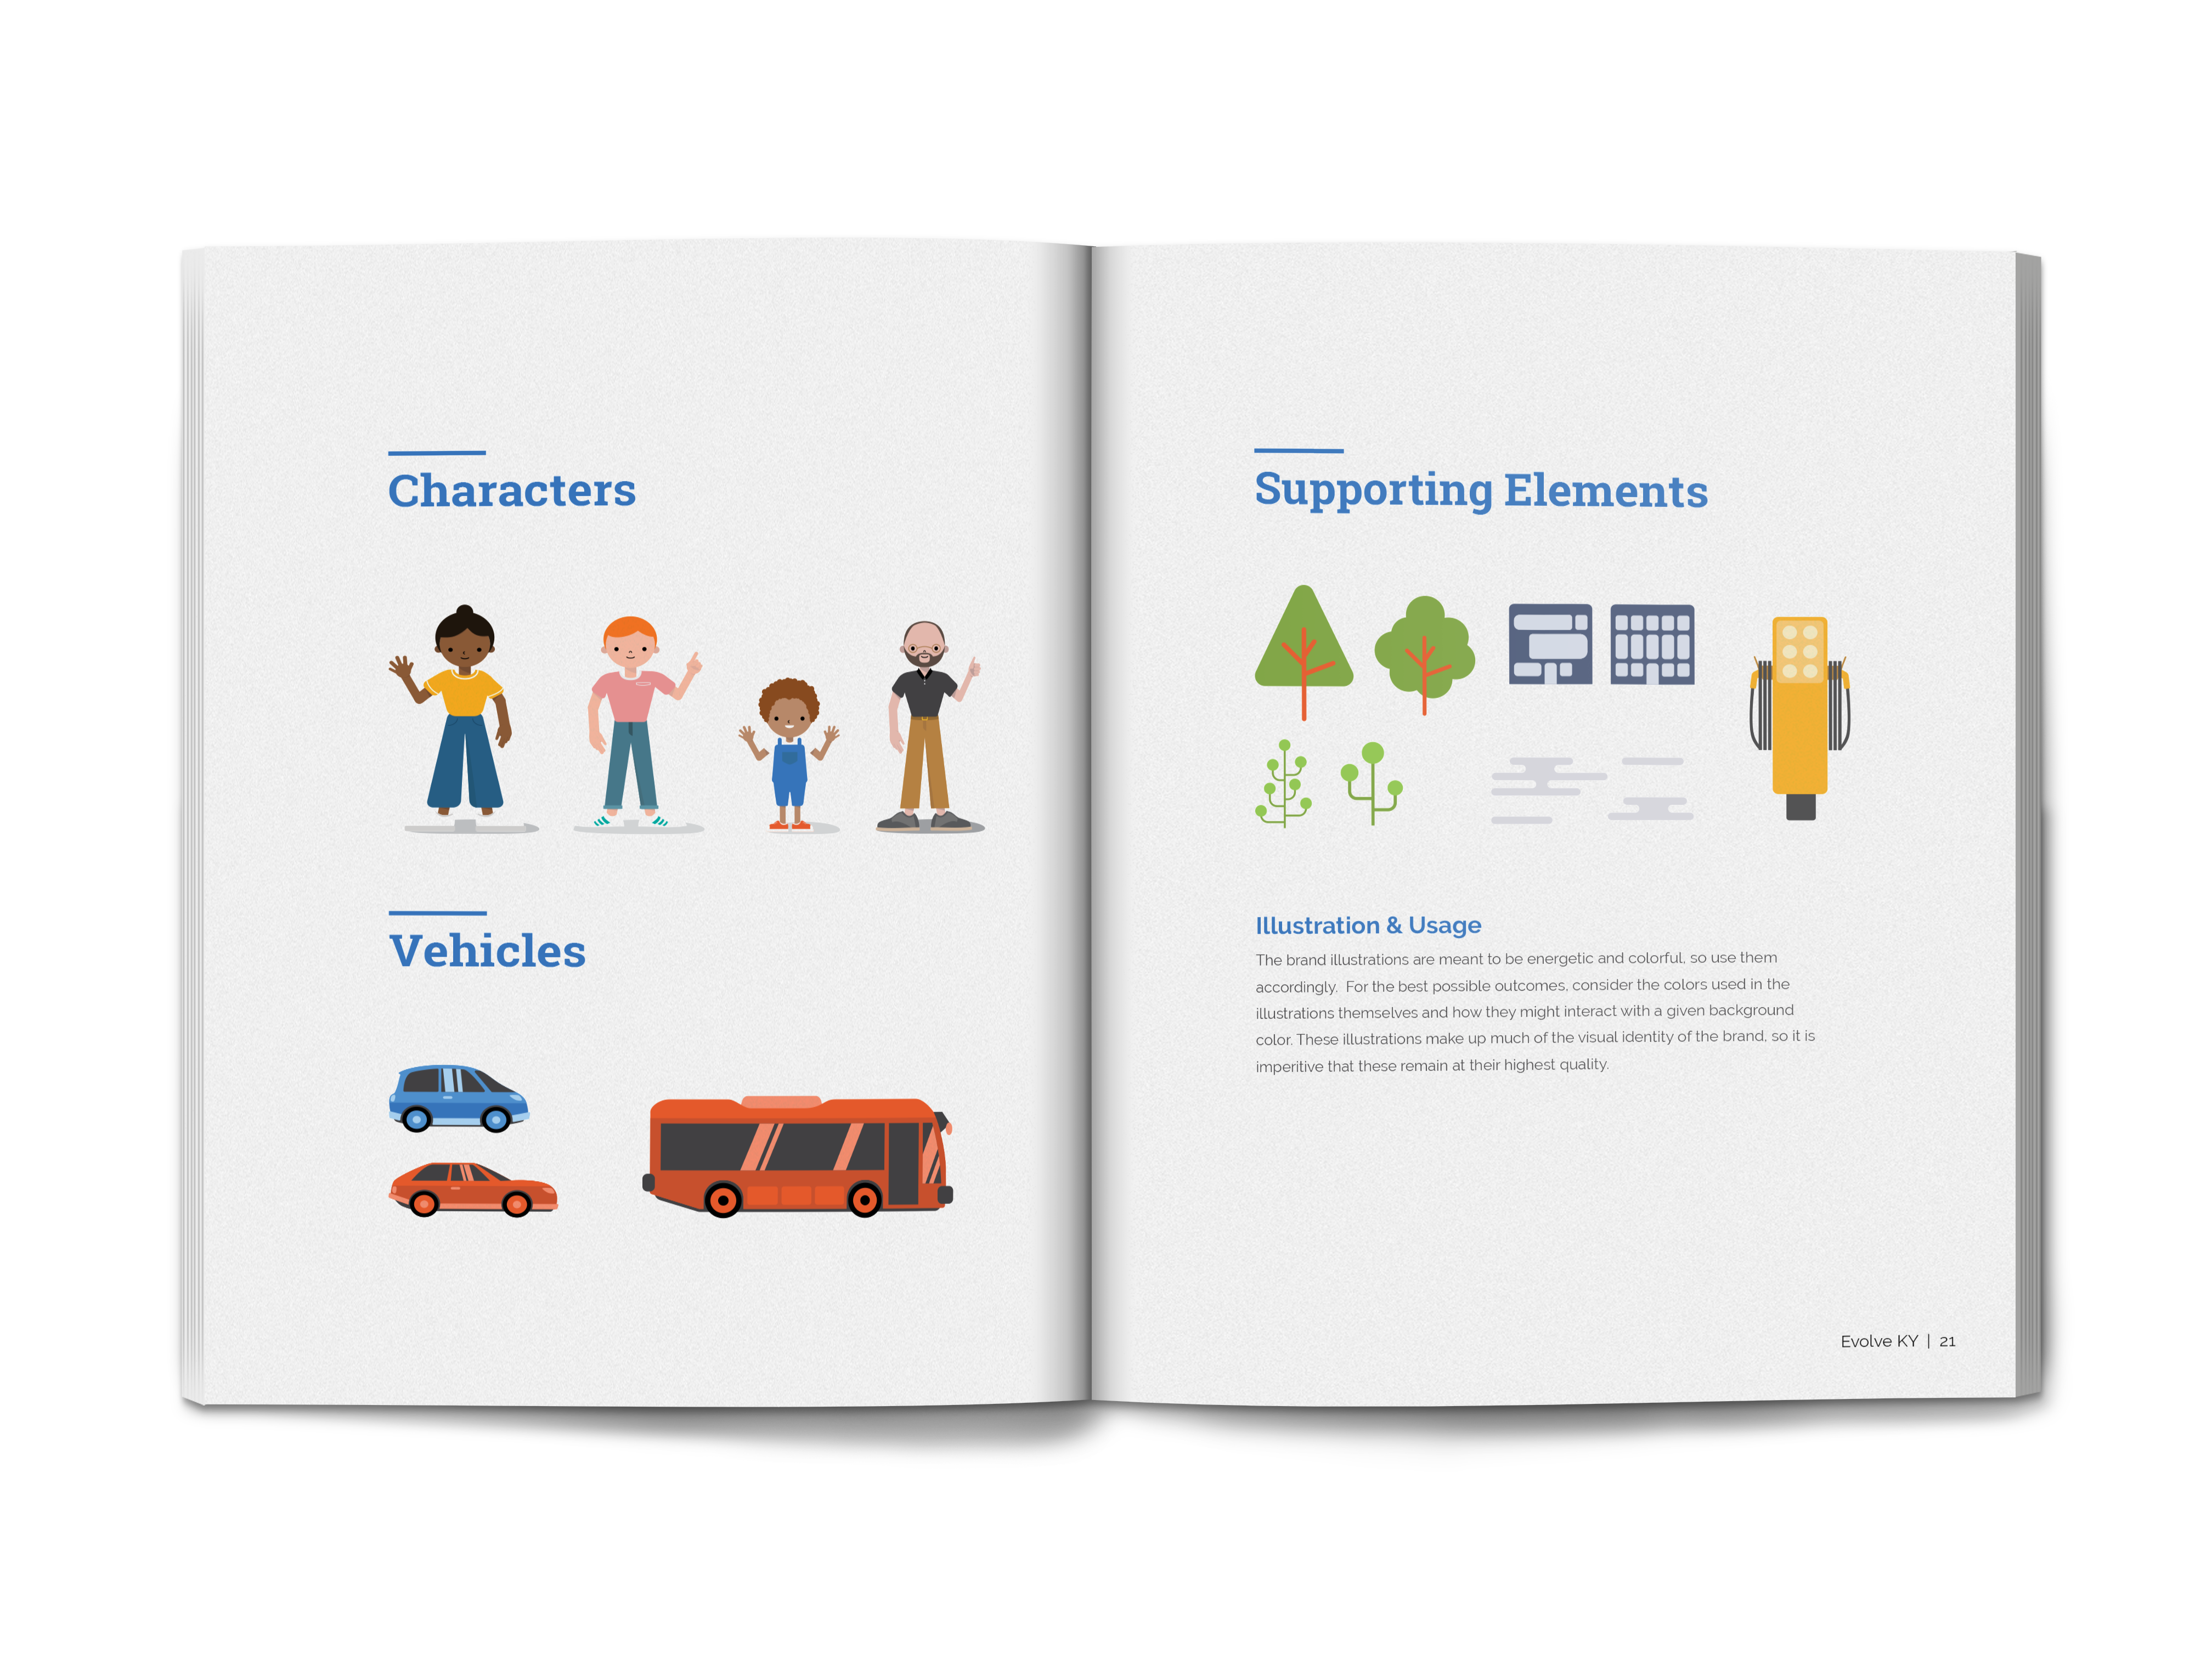 mockup of Evolve KY's brand standards guide outlining the illustrations and characters created for them